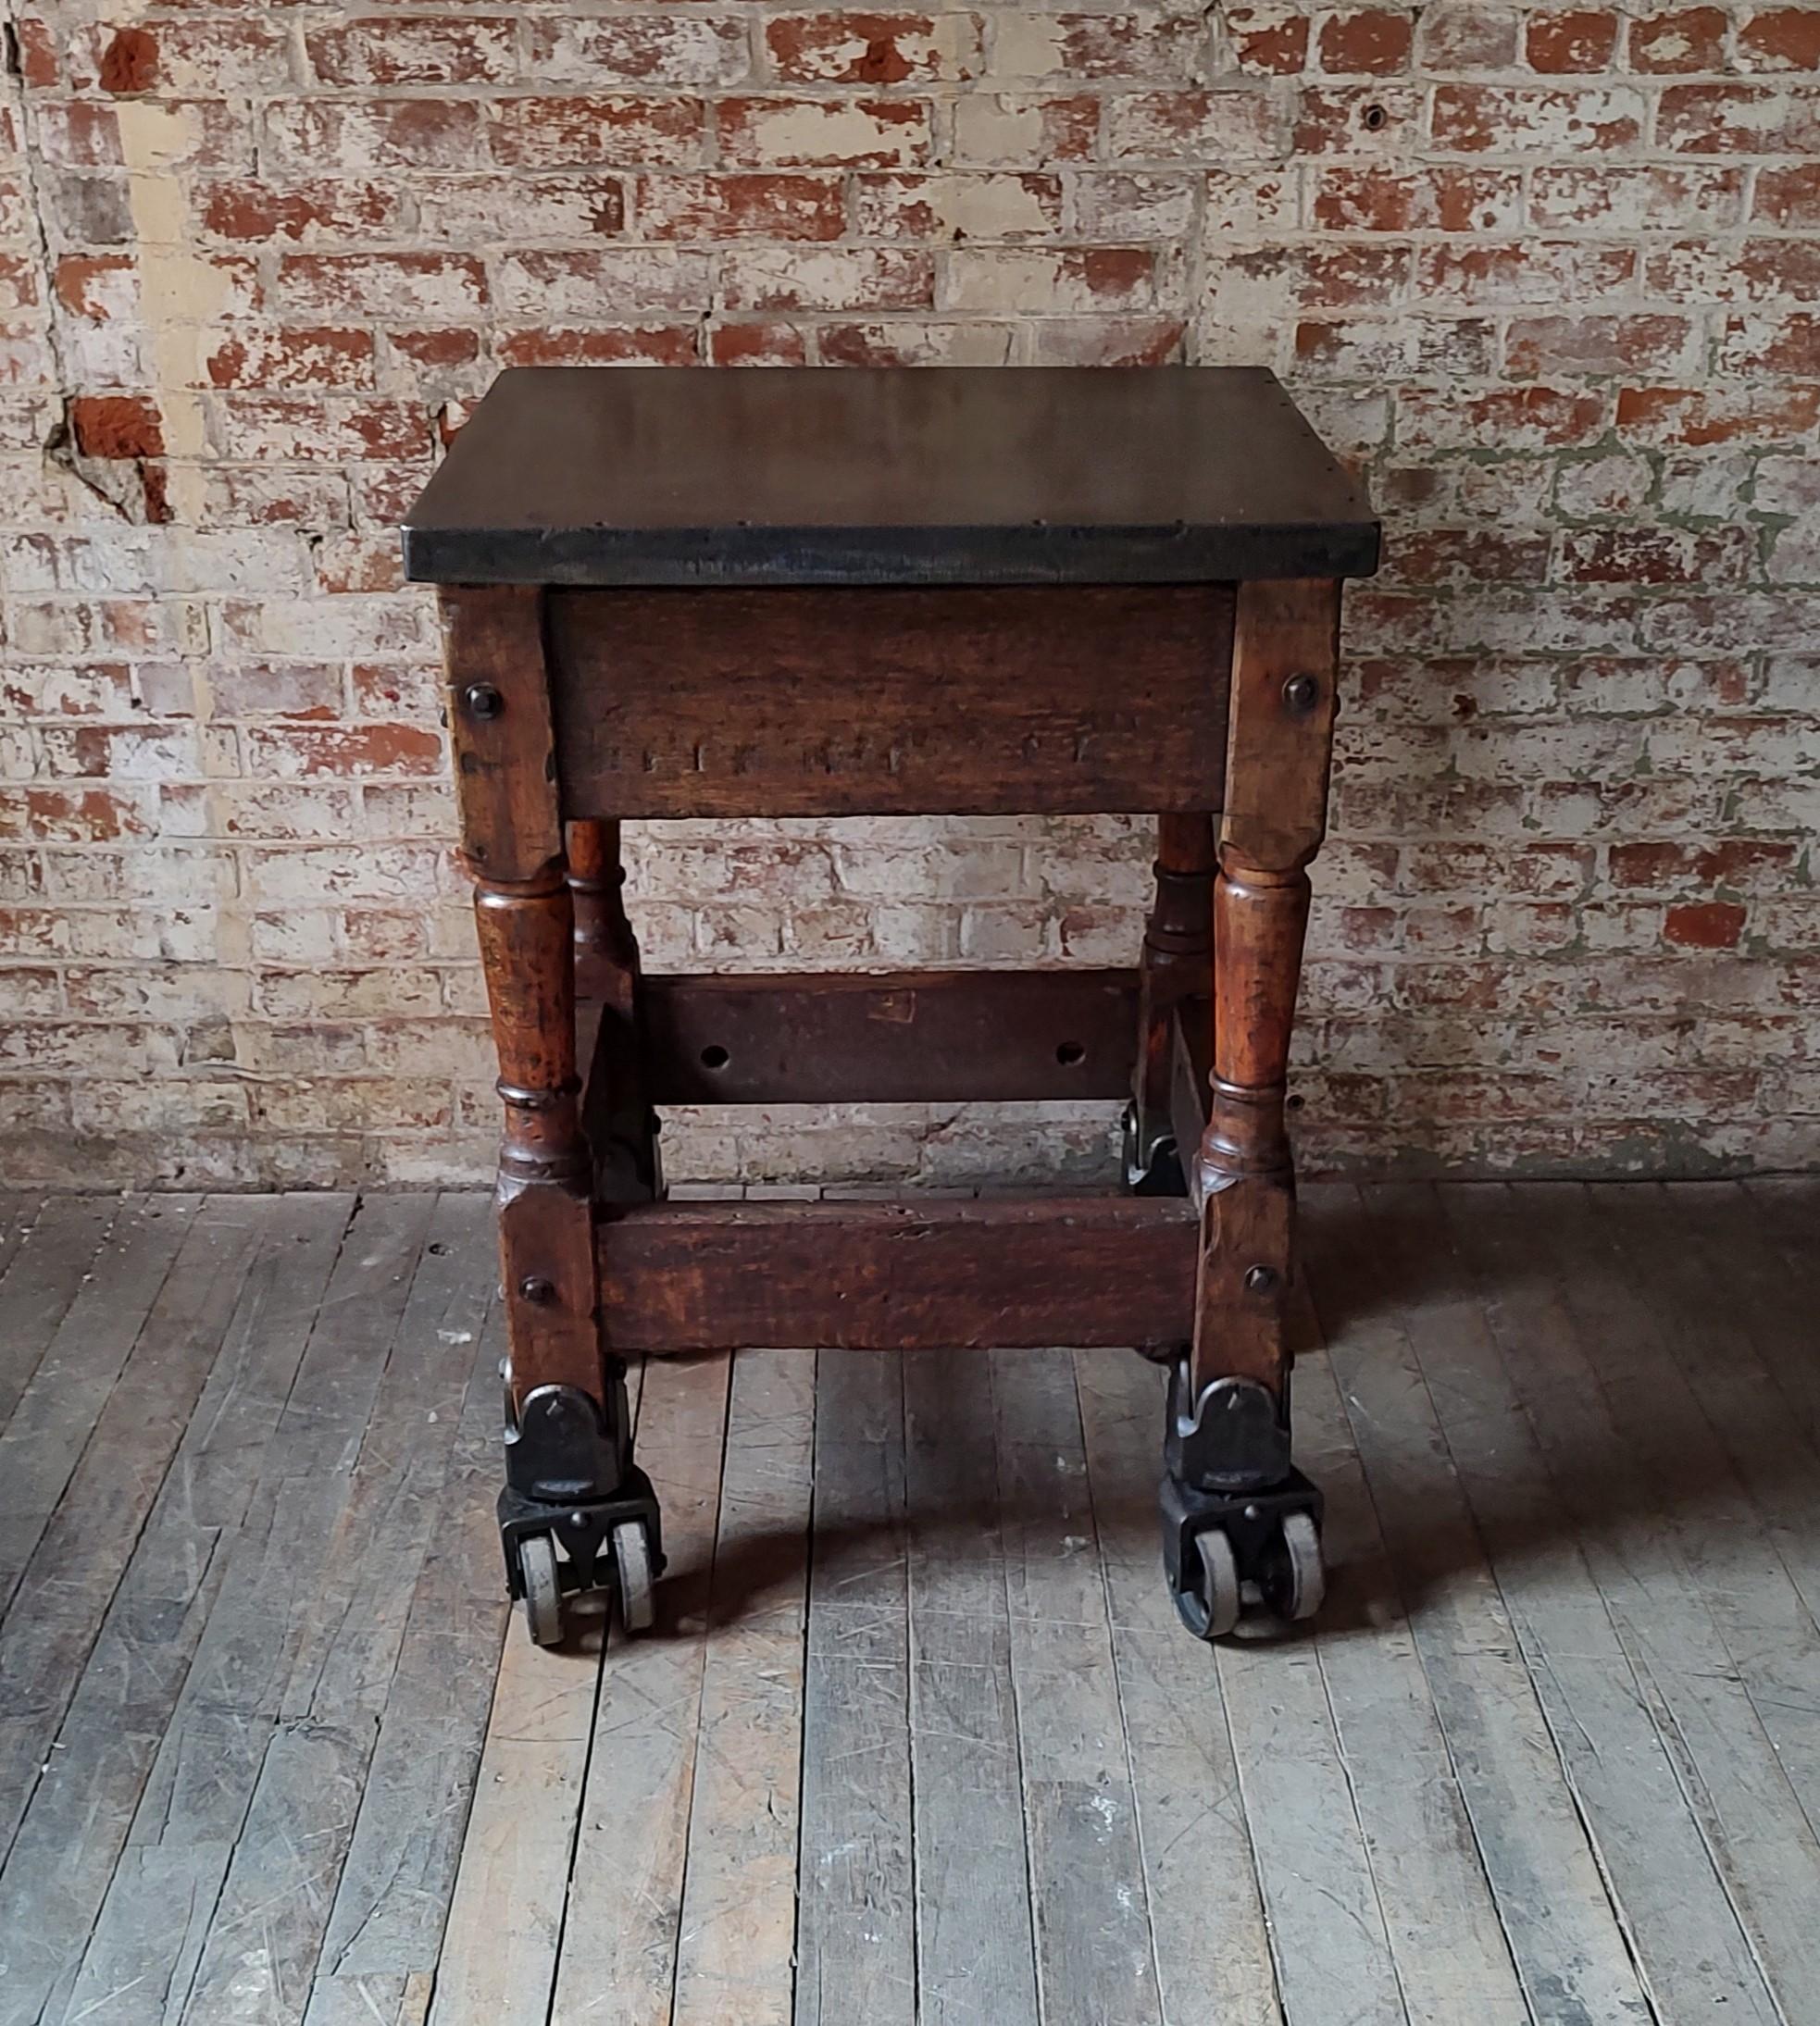 Antique Printer's Turtle Table

Overall Dimensions: 24